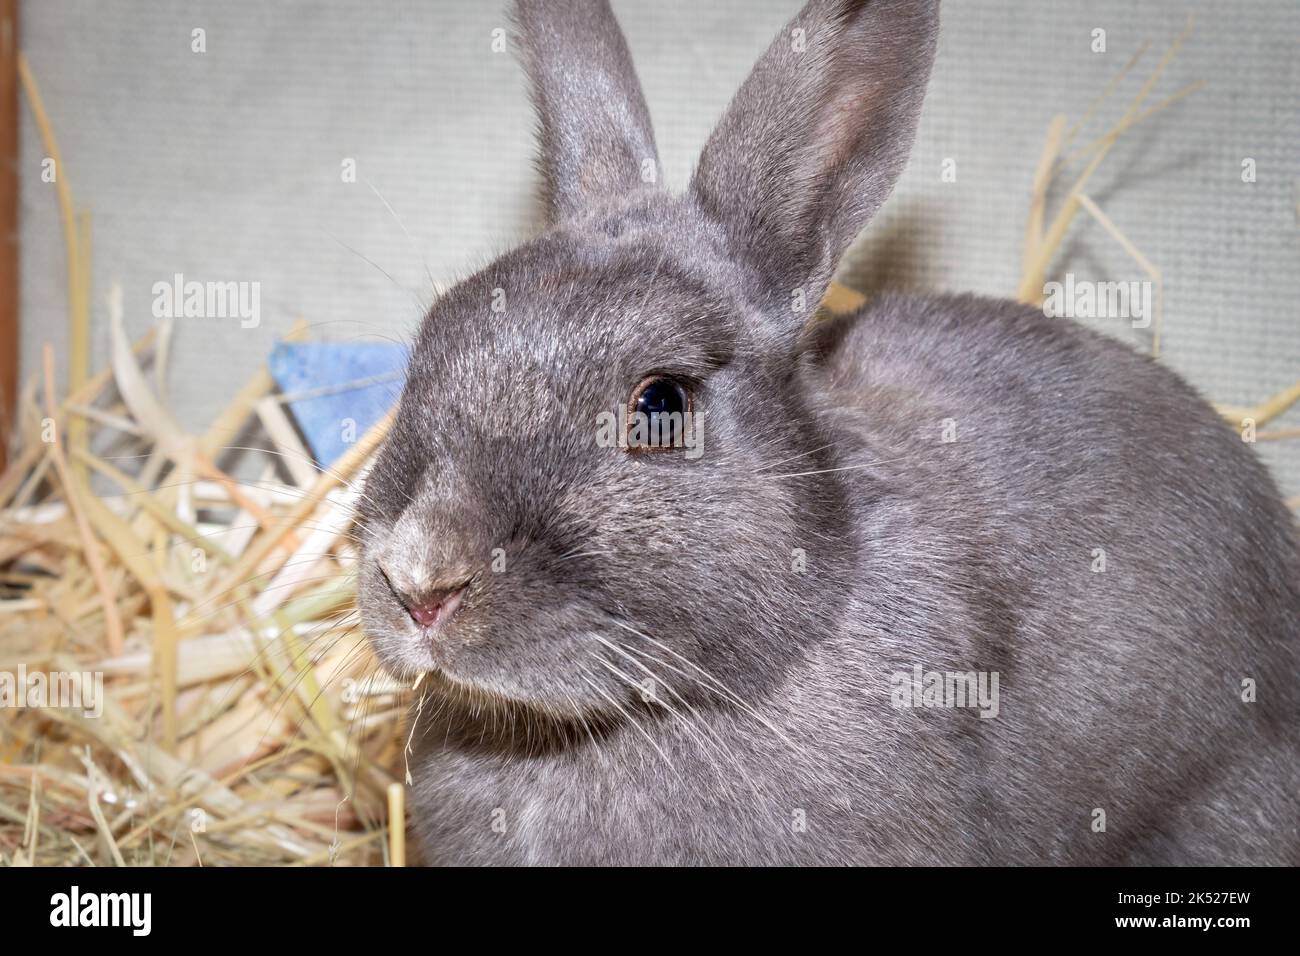 Cute domestic pet rabbit, Cape Town, South Africa Stock Photo